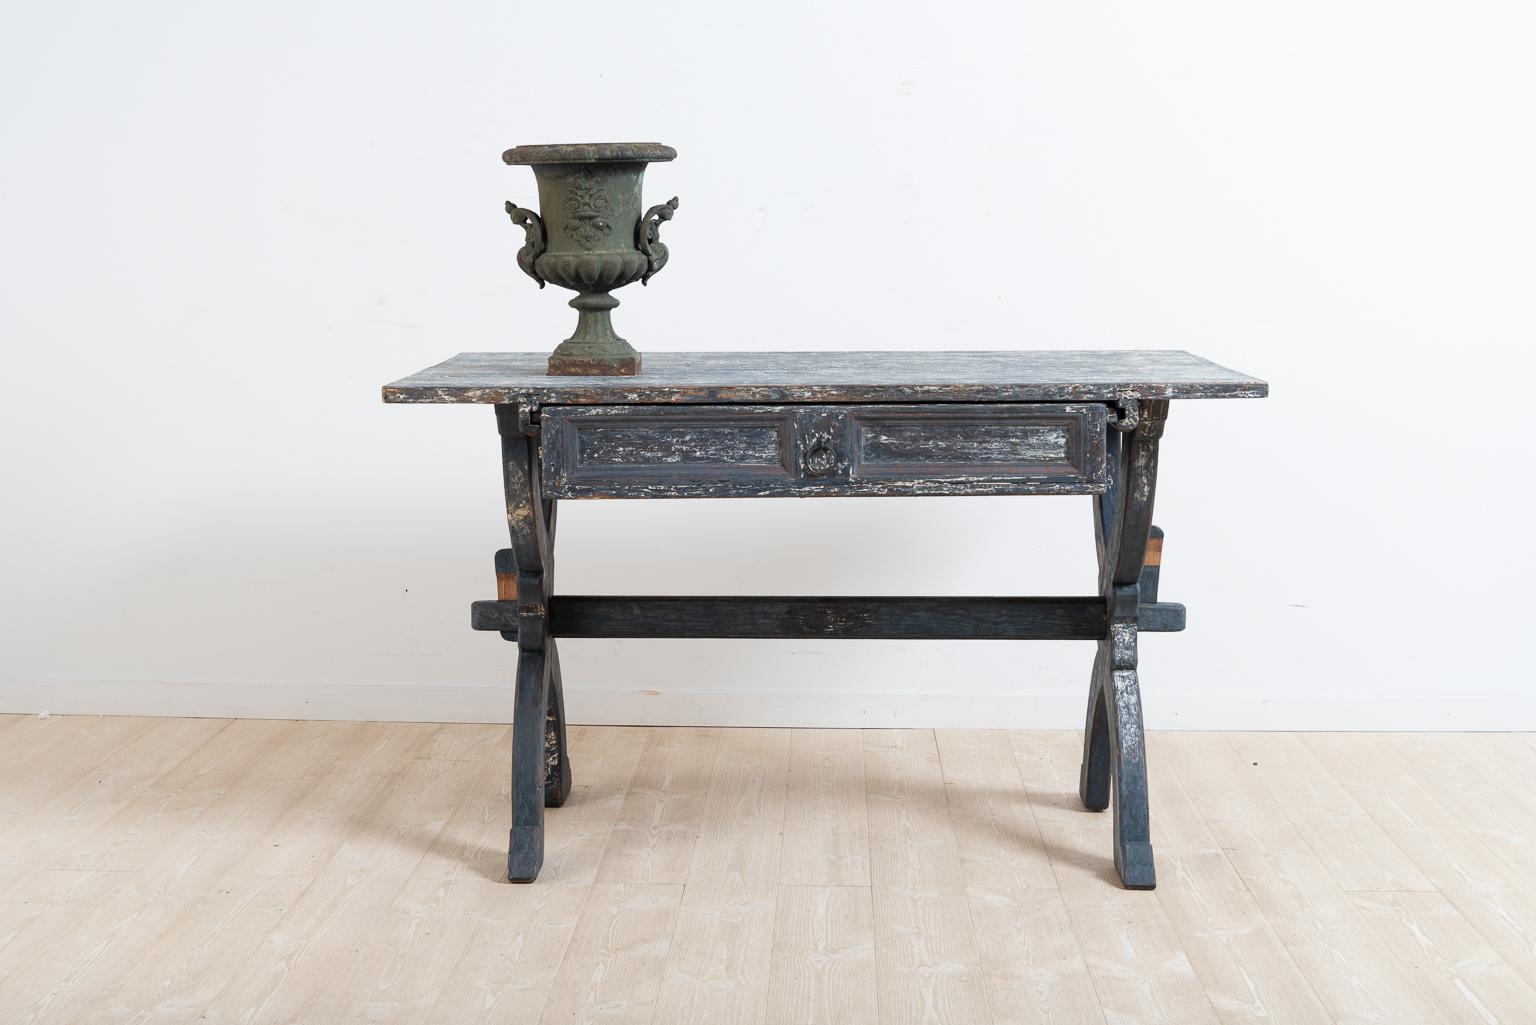 Blue folk art trestle table from northern Sweden. The table is made with a drawer and all parts are original to the table. Scraped to the original blue paint the table has charming distress and different tones in the paint which makes it interesting